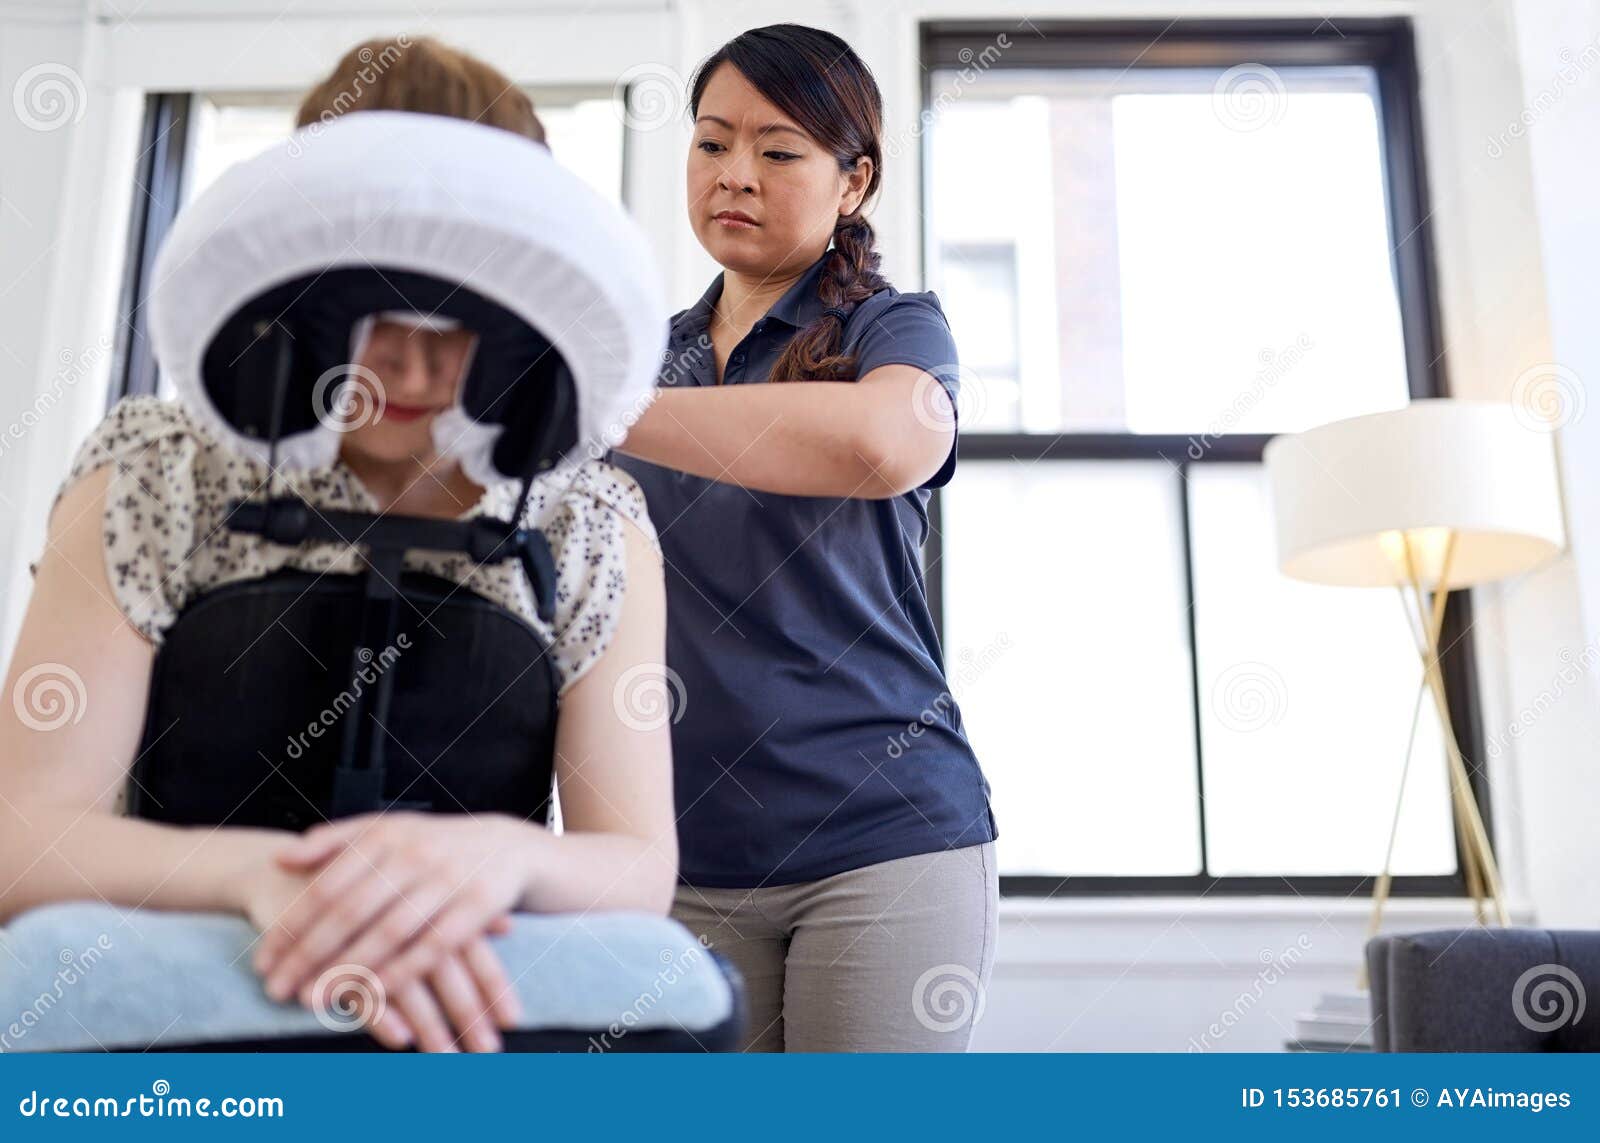 Chinese Woman Massage Therapist Giving A Neck And Back